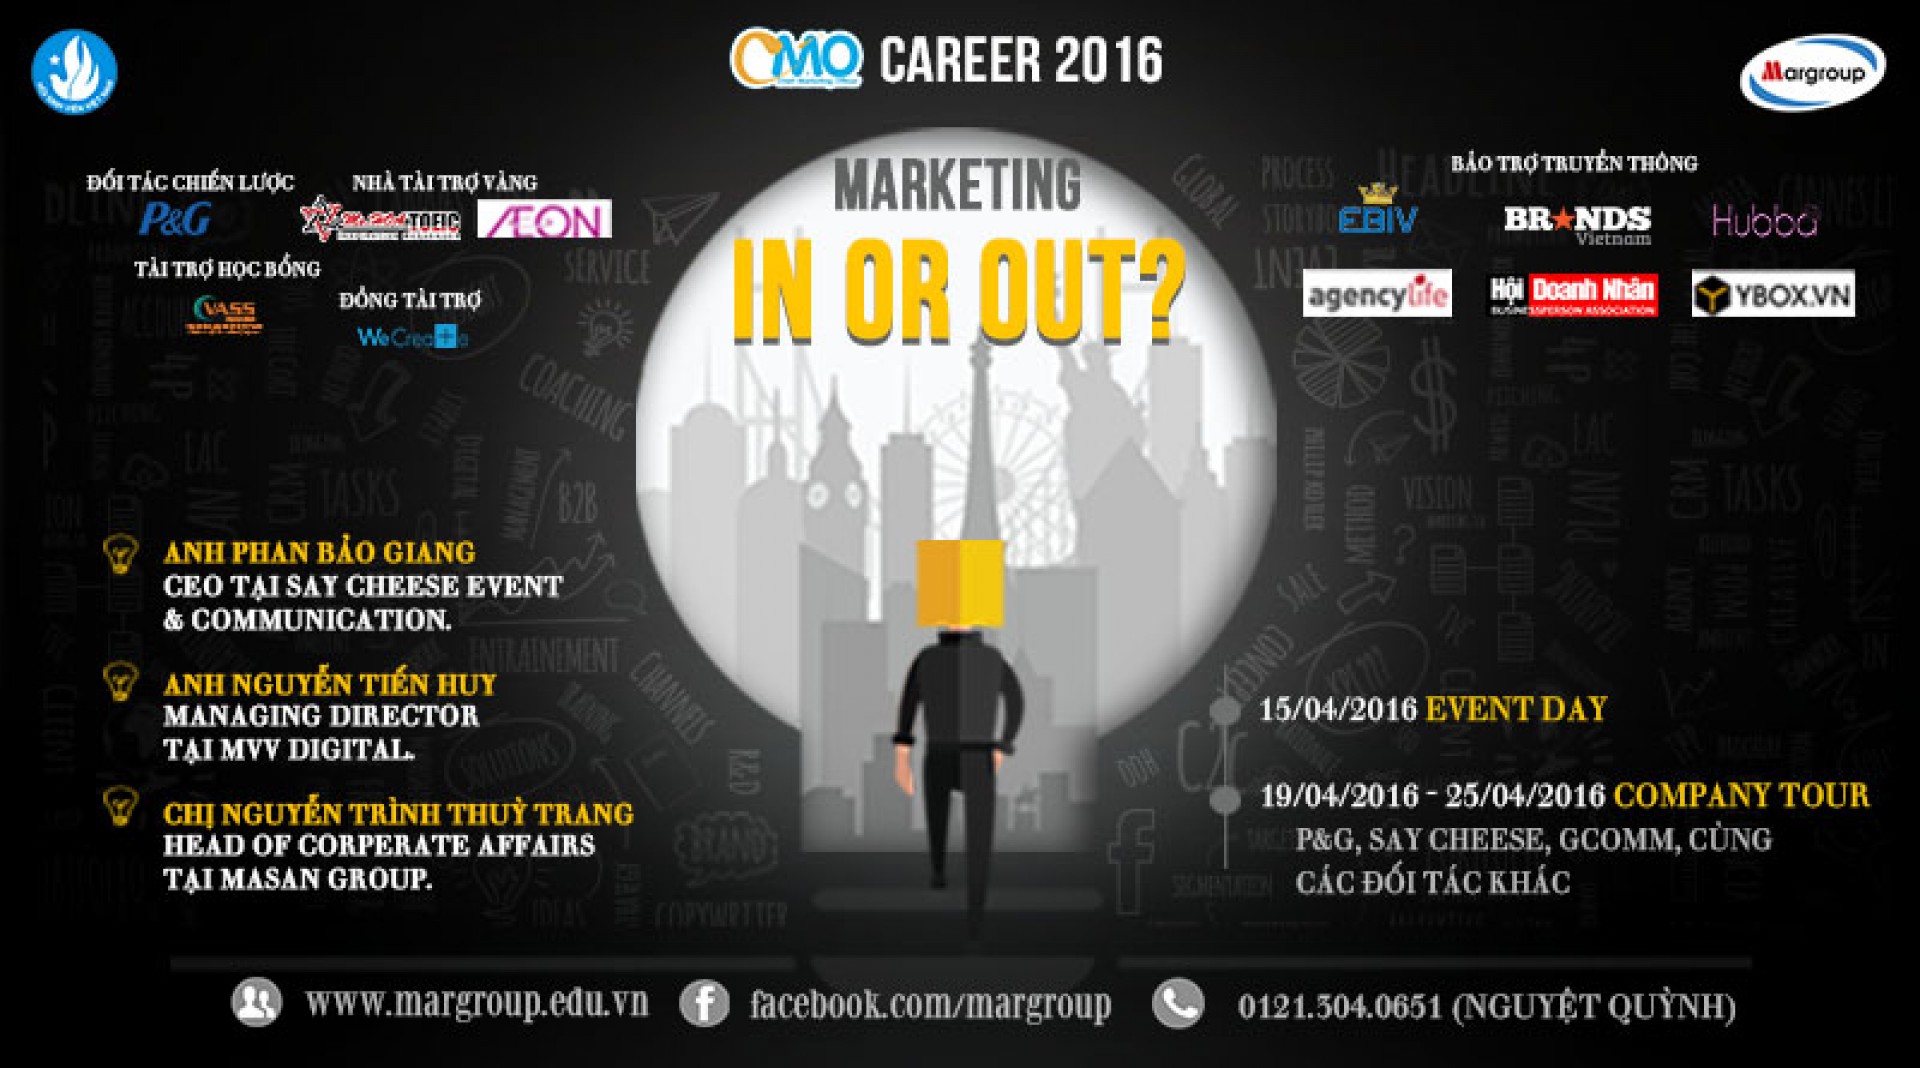 CMO CAREER 2016 “MARKETING, IN OR OUT?”